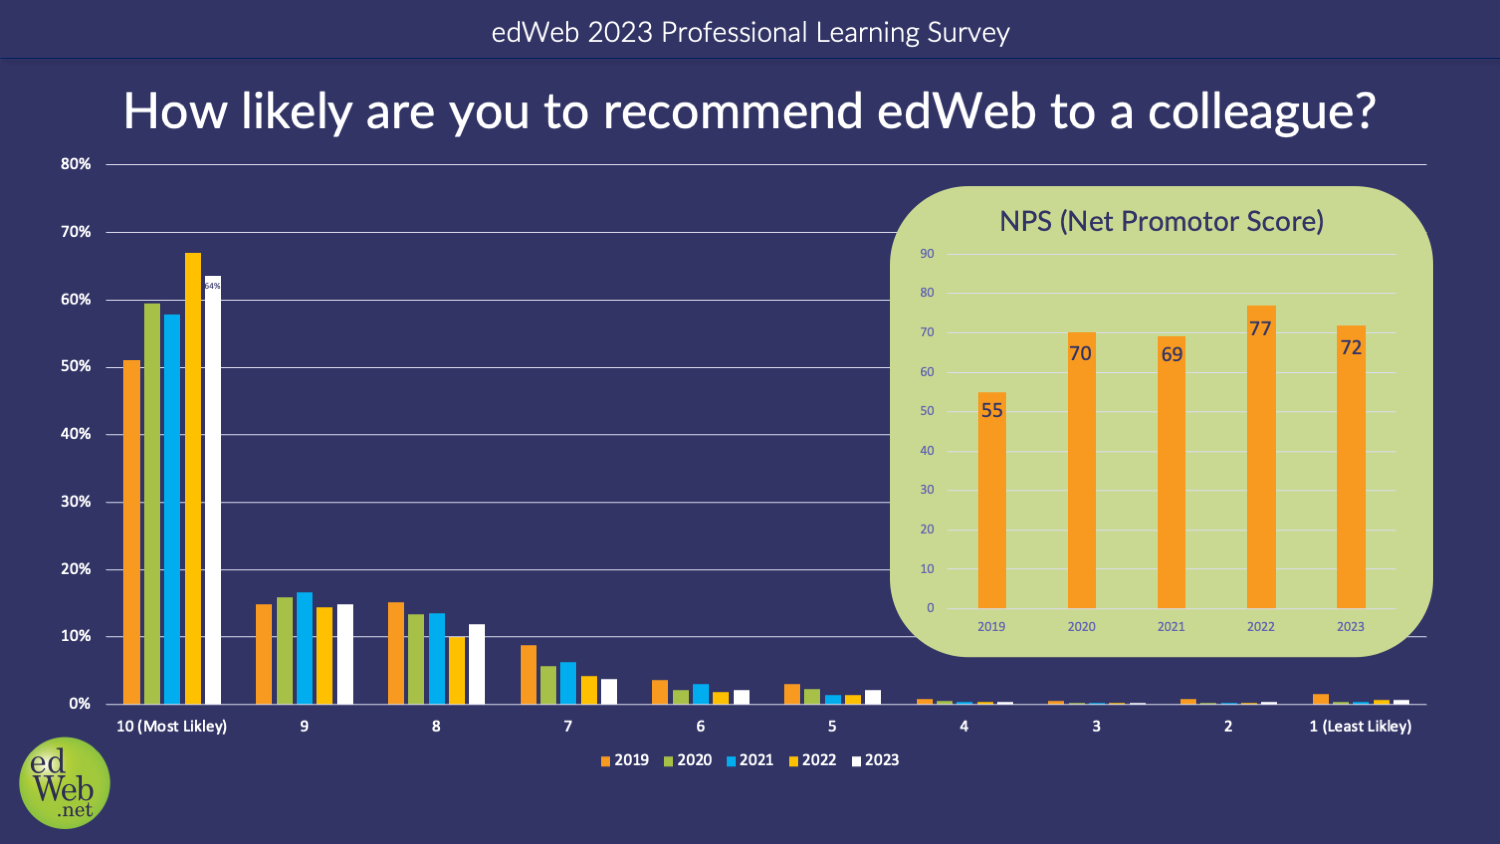 How likely are you to recommend edWeb to a colleague?